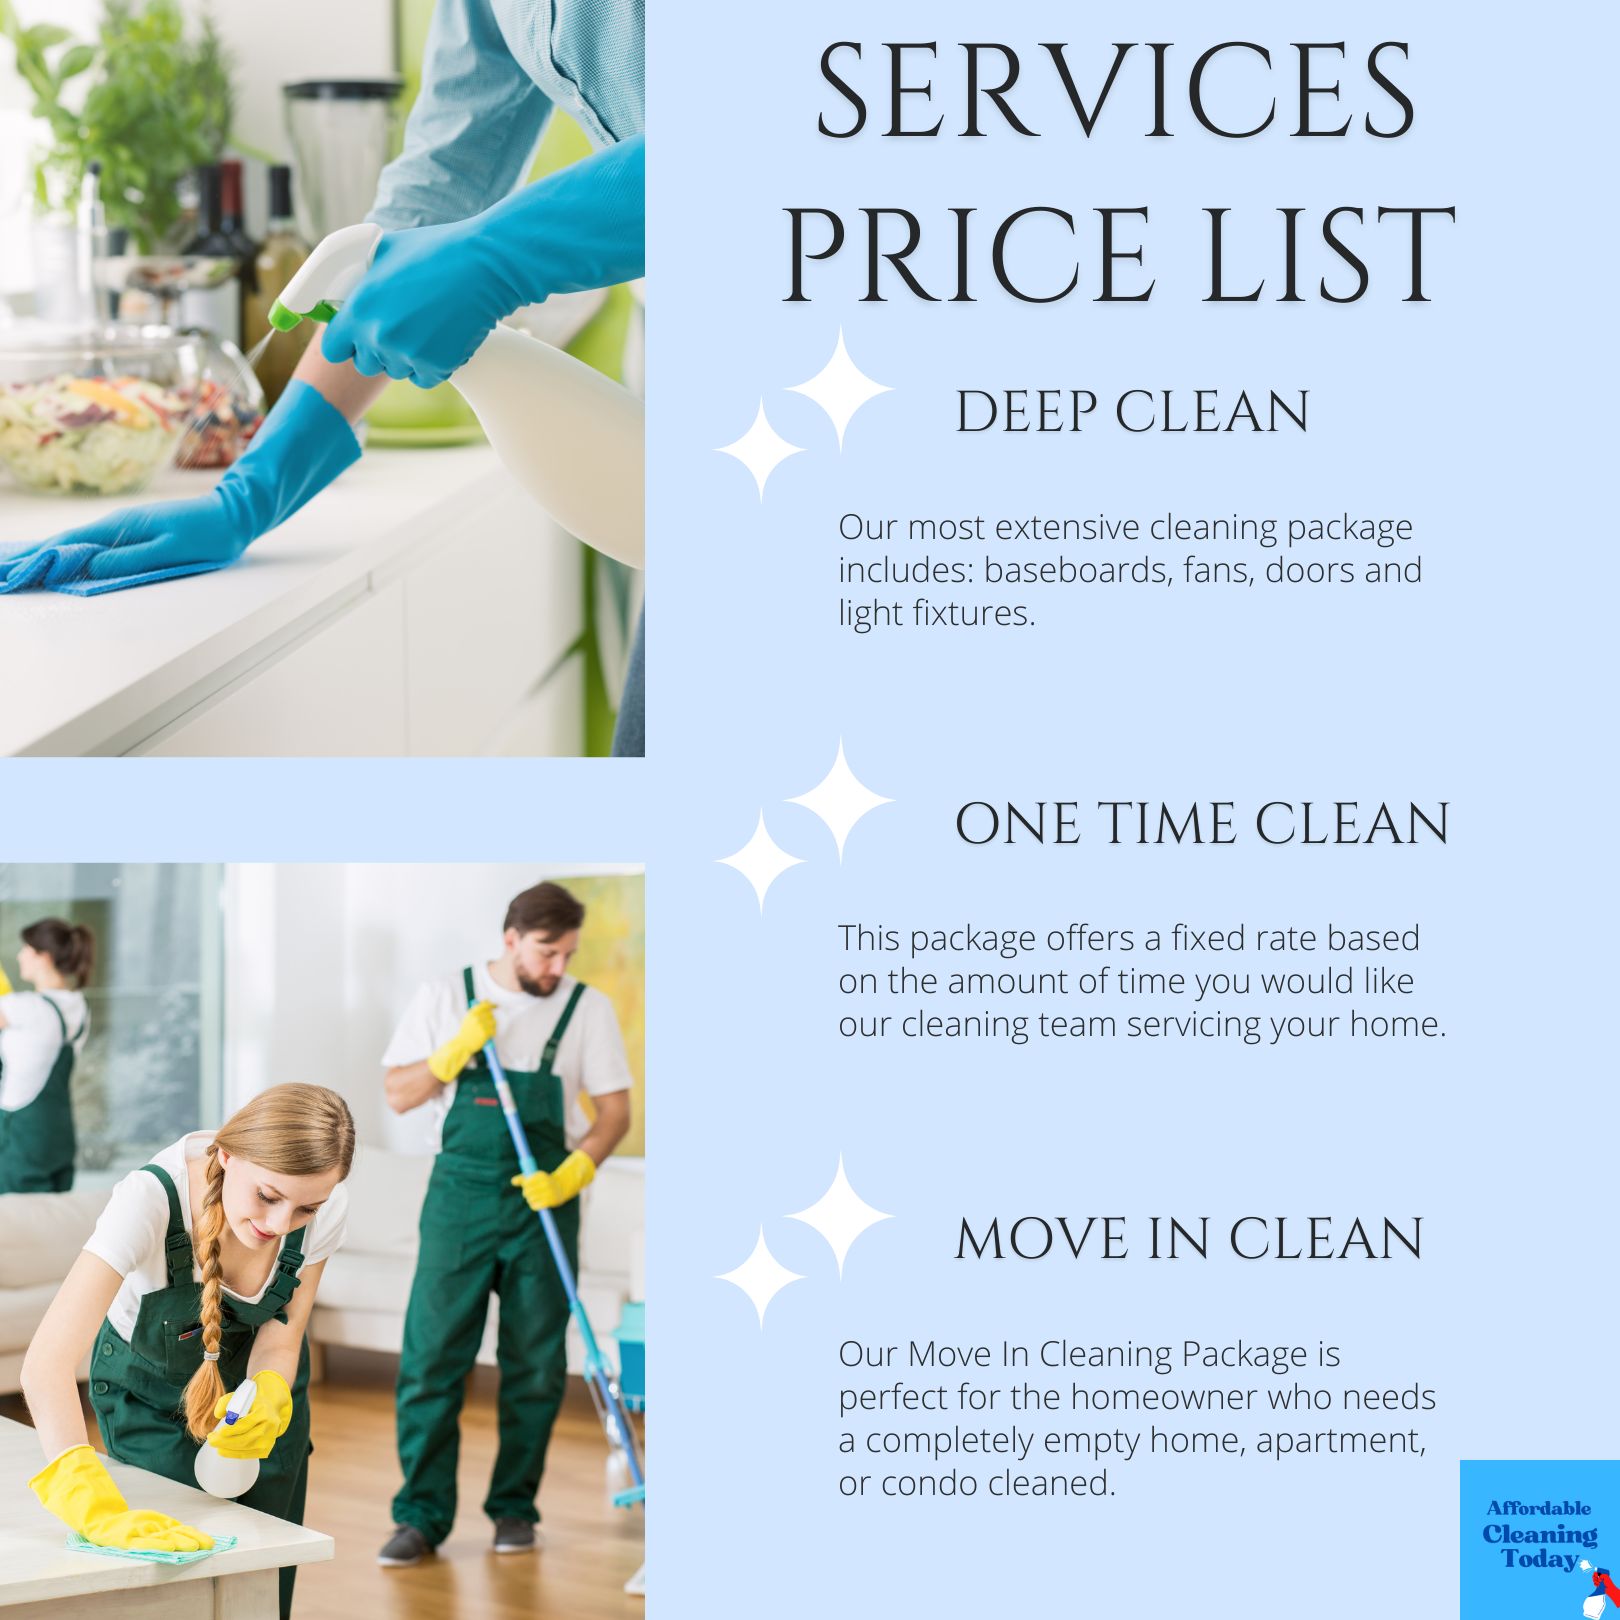 House Cleaning Services Price List Hudson Florida